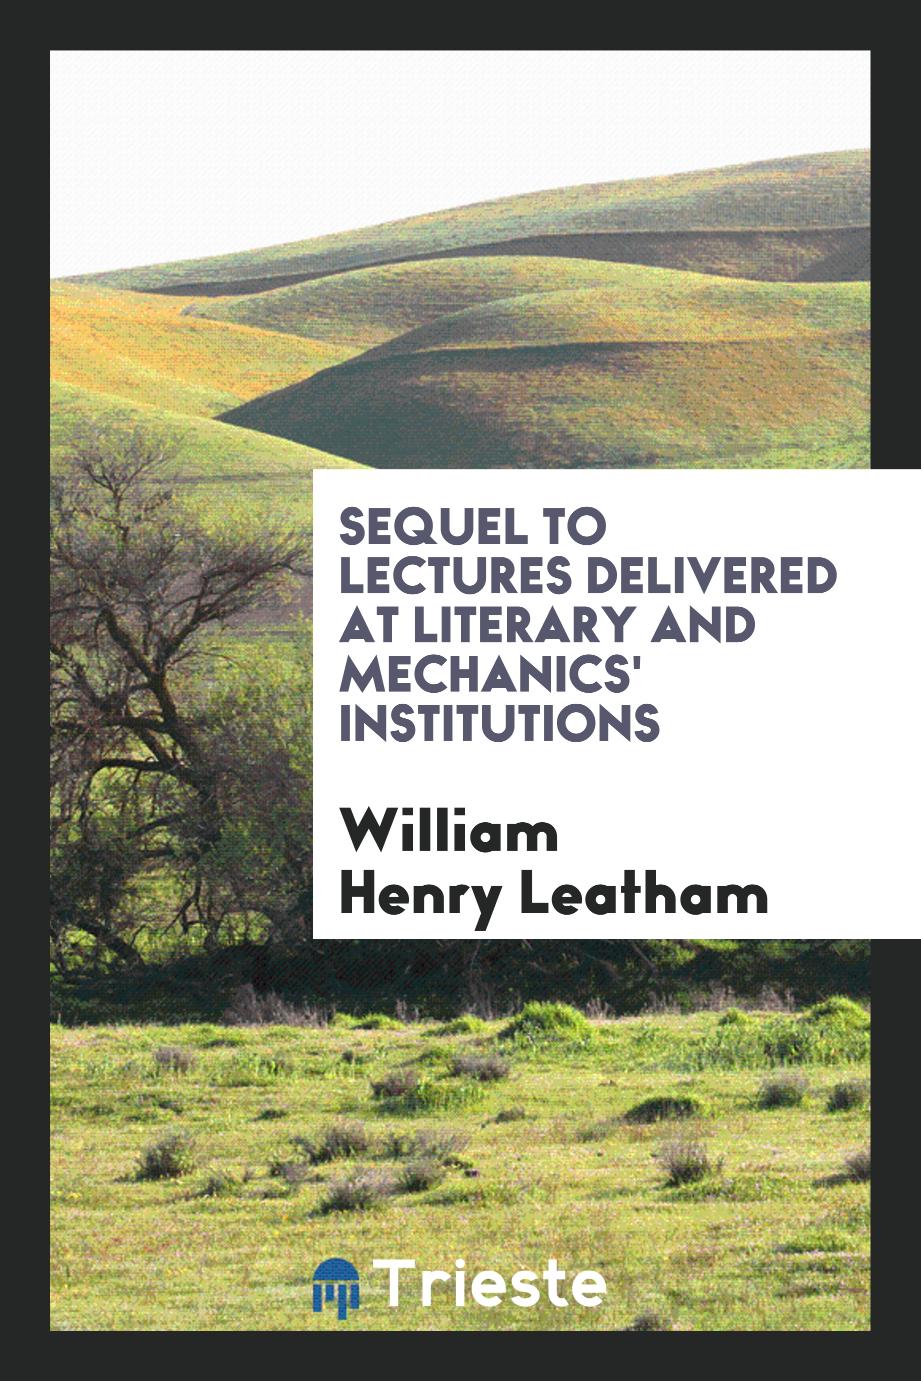 Sequel to Lectures delivered at literary and mechanics' institutions